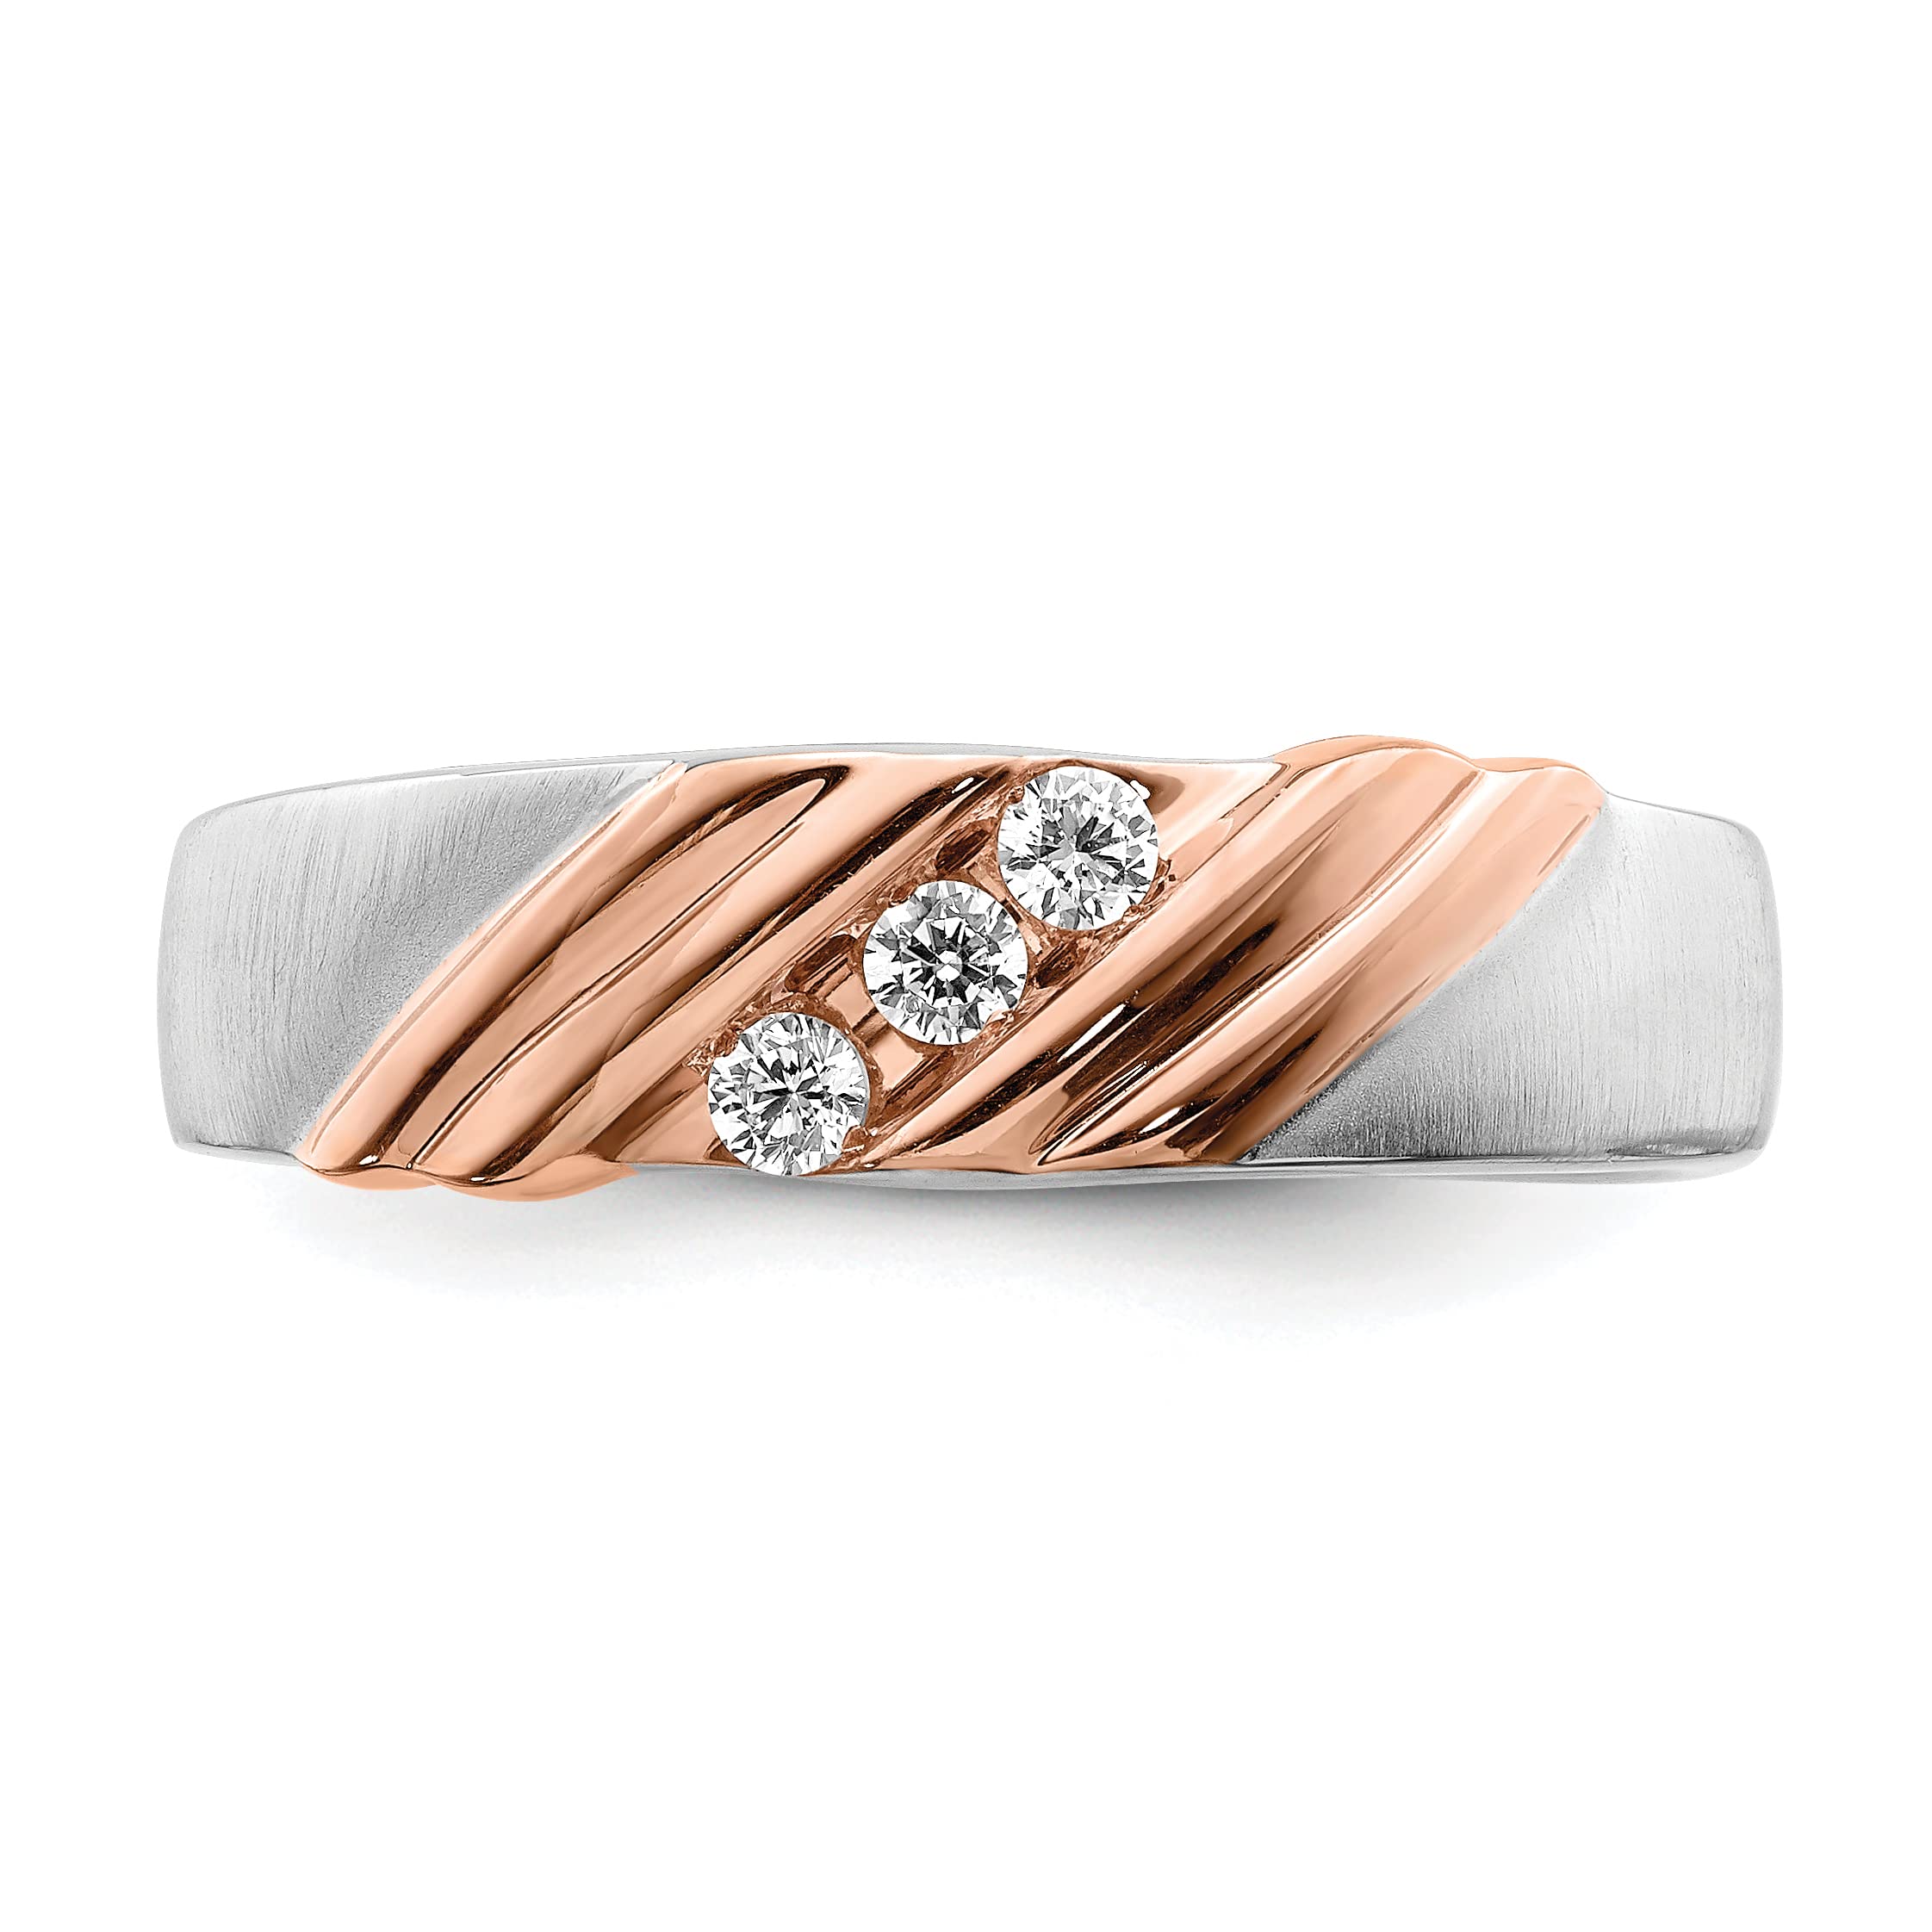 Jewels By Lux Solid 14k White and Rose Two Tone Gold 3-Stone 1/6 carat Diamond Complete Mens Wedding Ring Band Available in Size 8 to 12 (Band Width: 3.66 to 6.26 mm)